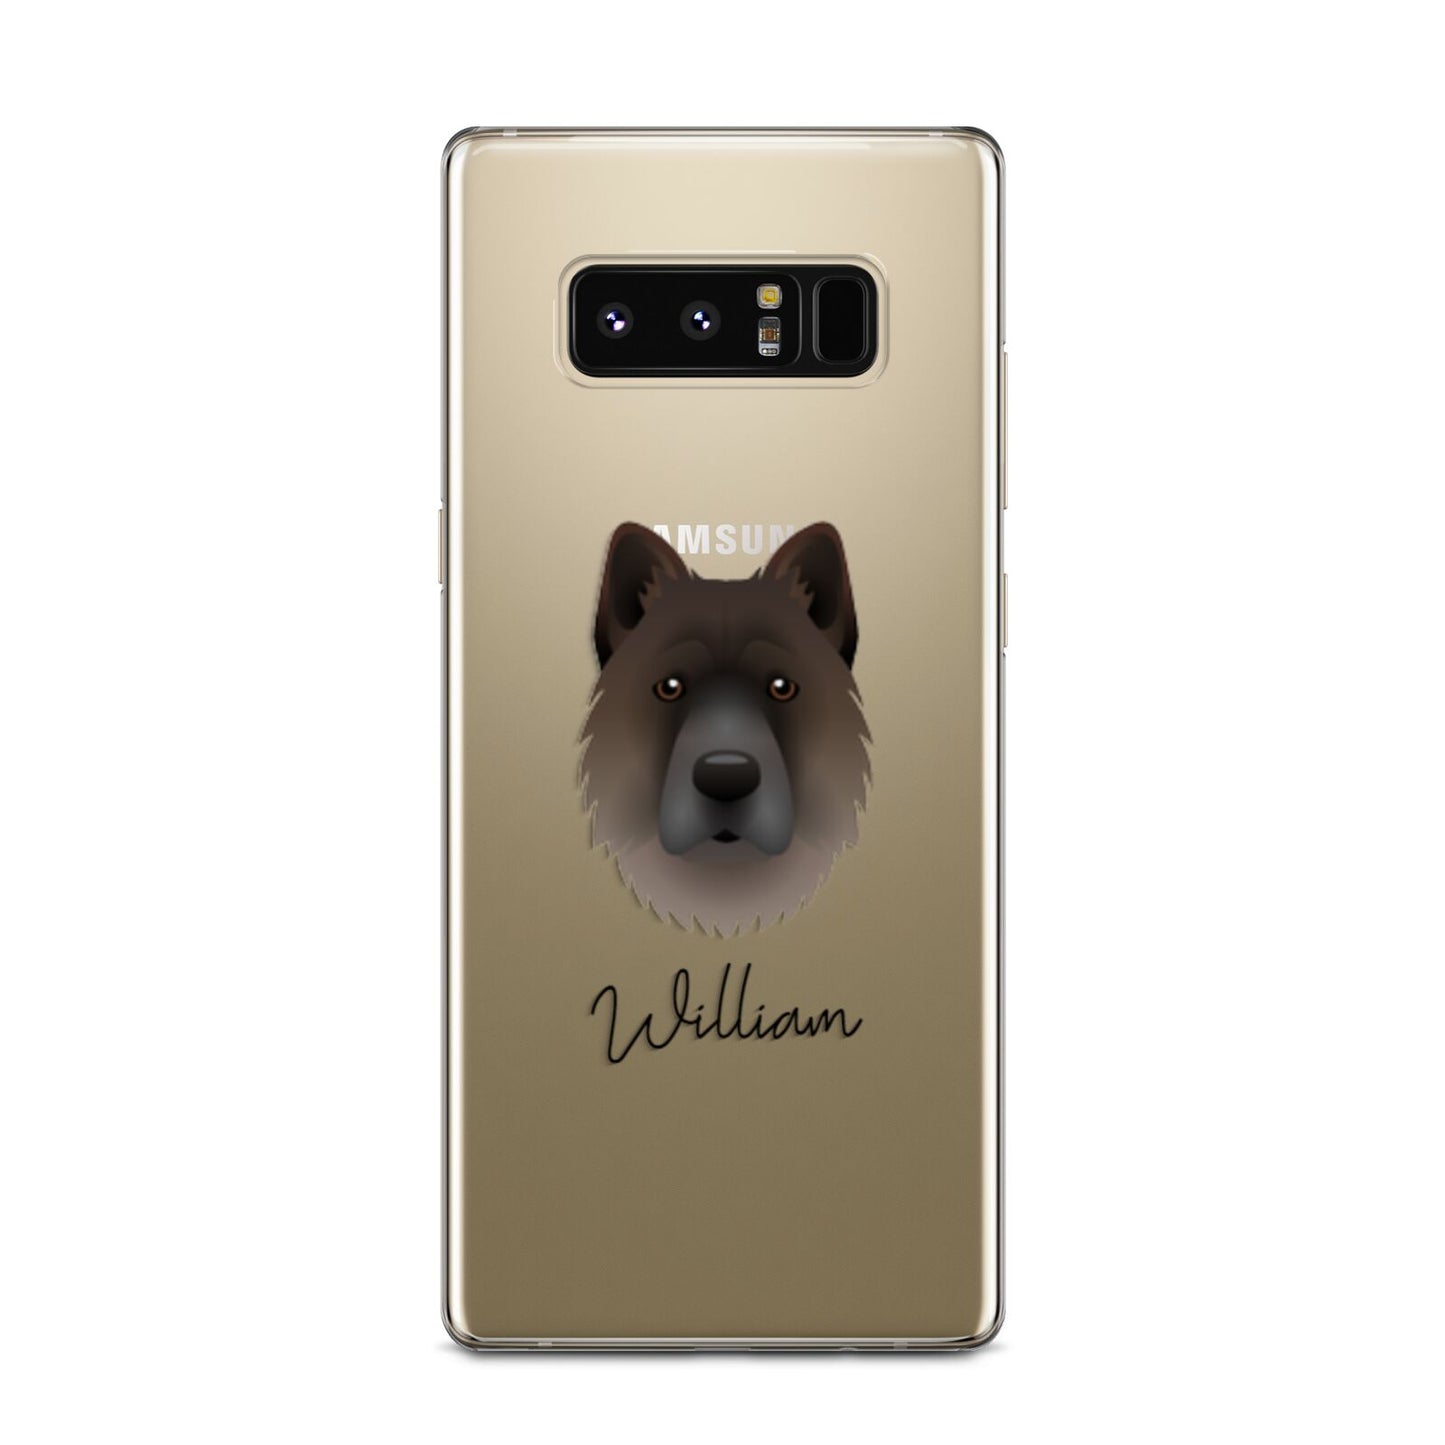 Chow Shepherd Personalised Samsung Galaxy Note 8 Case